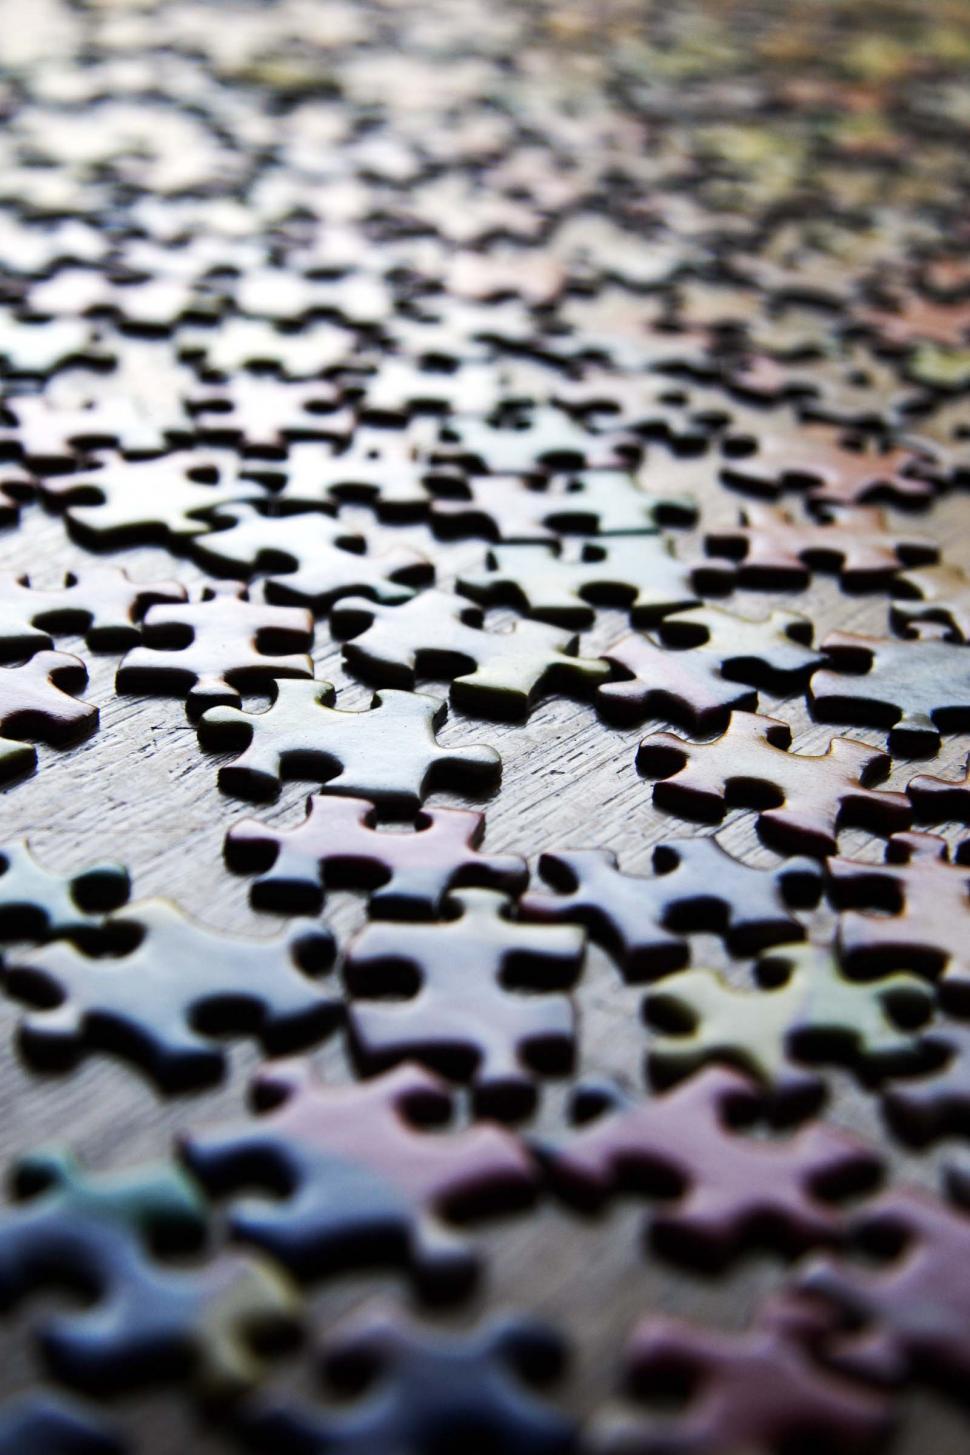 Free Image of Puzzle pieces 